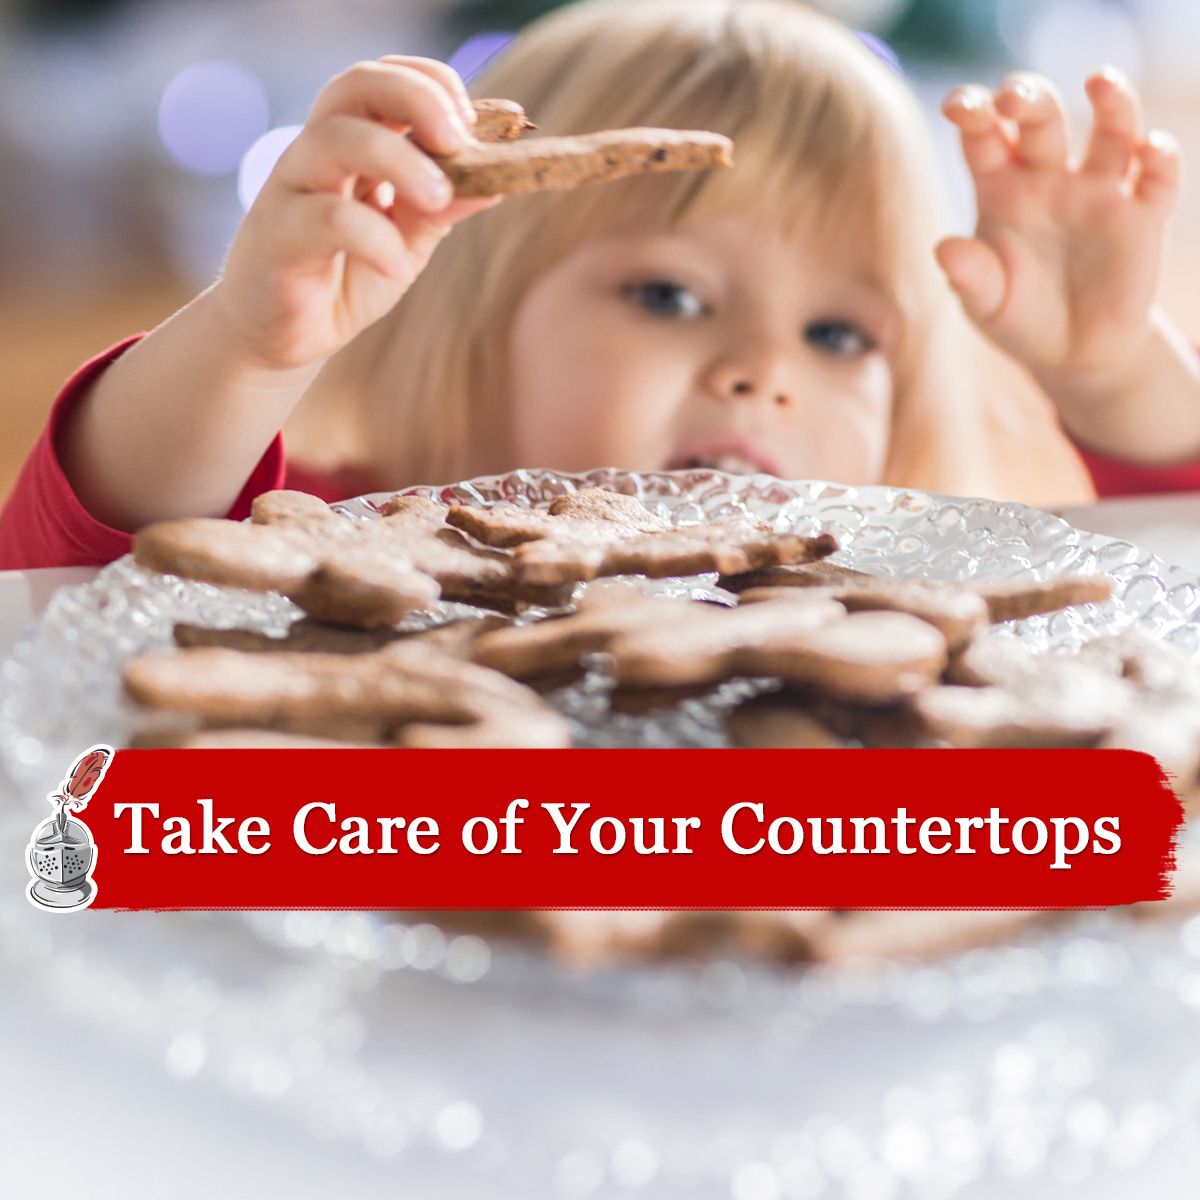 Take Care of Your Countertops